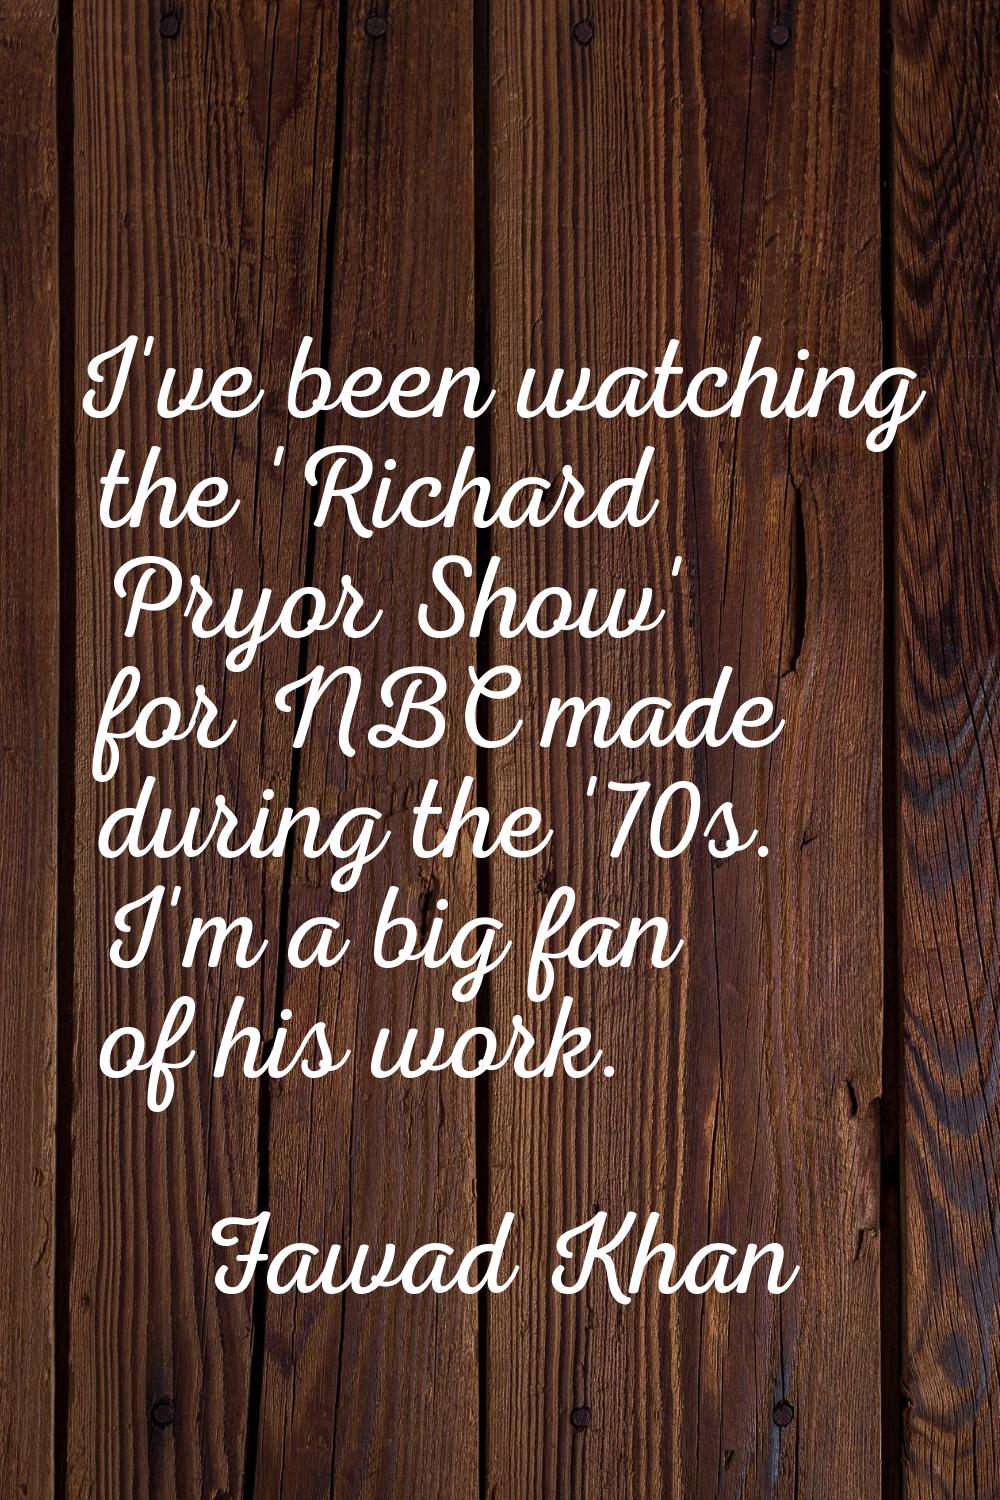 I've been watching the 'Richard Pryor Show' for NBC made during the '70s. I'm a big fan of his work